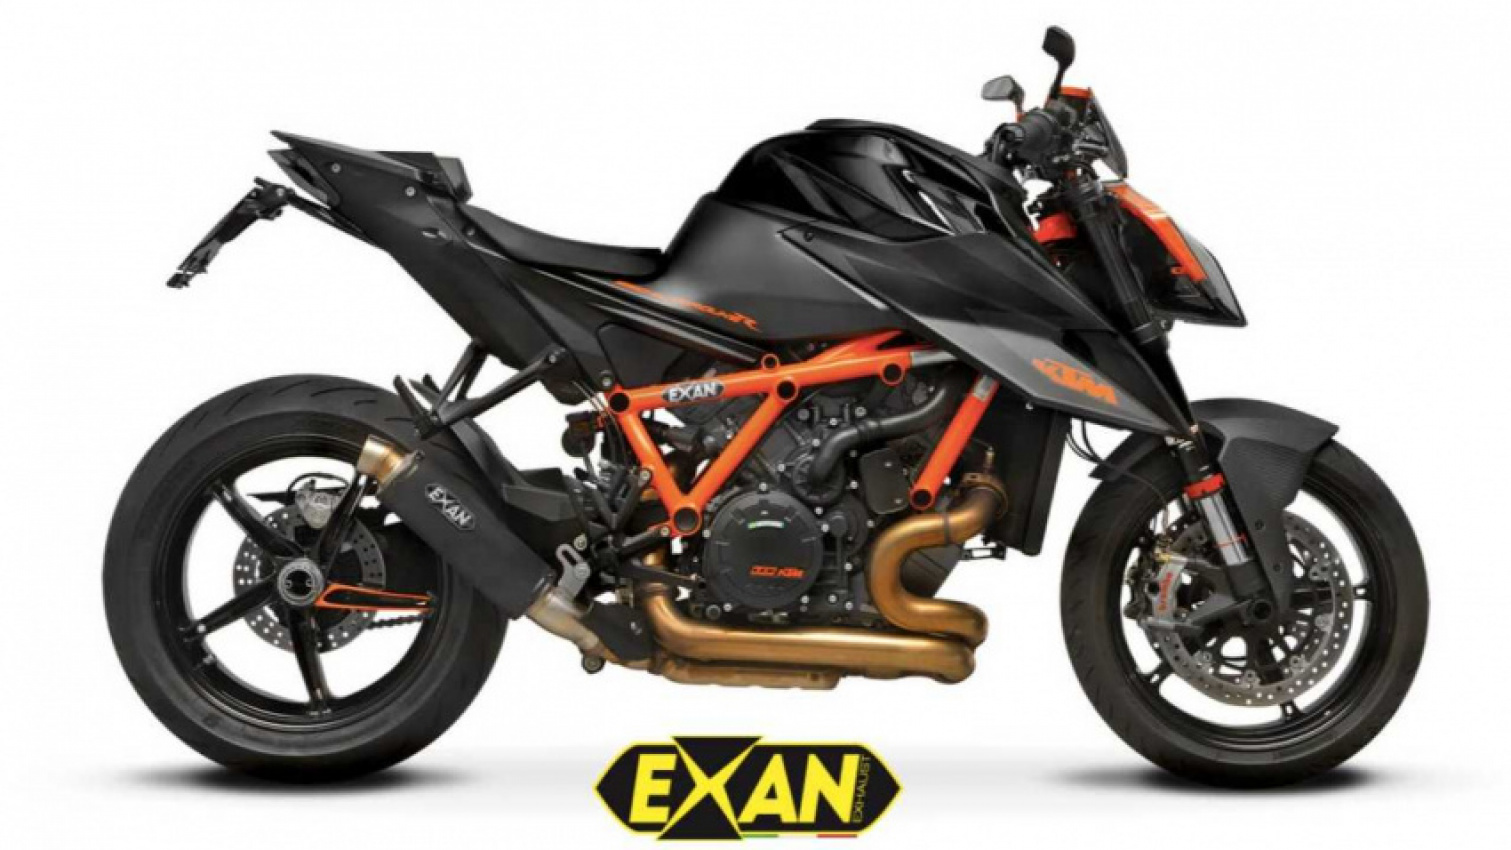 autos, cars, ktm, exan releases new euro 5 exhaust options for ktm 290 super duke r